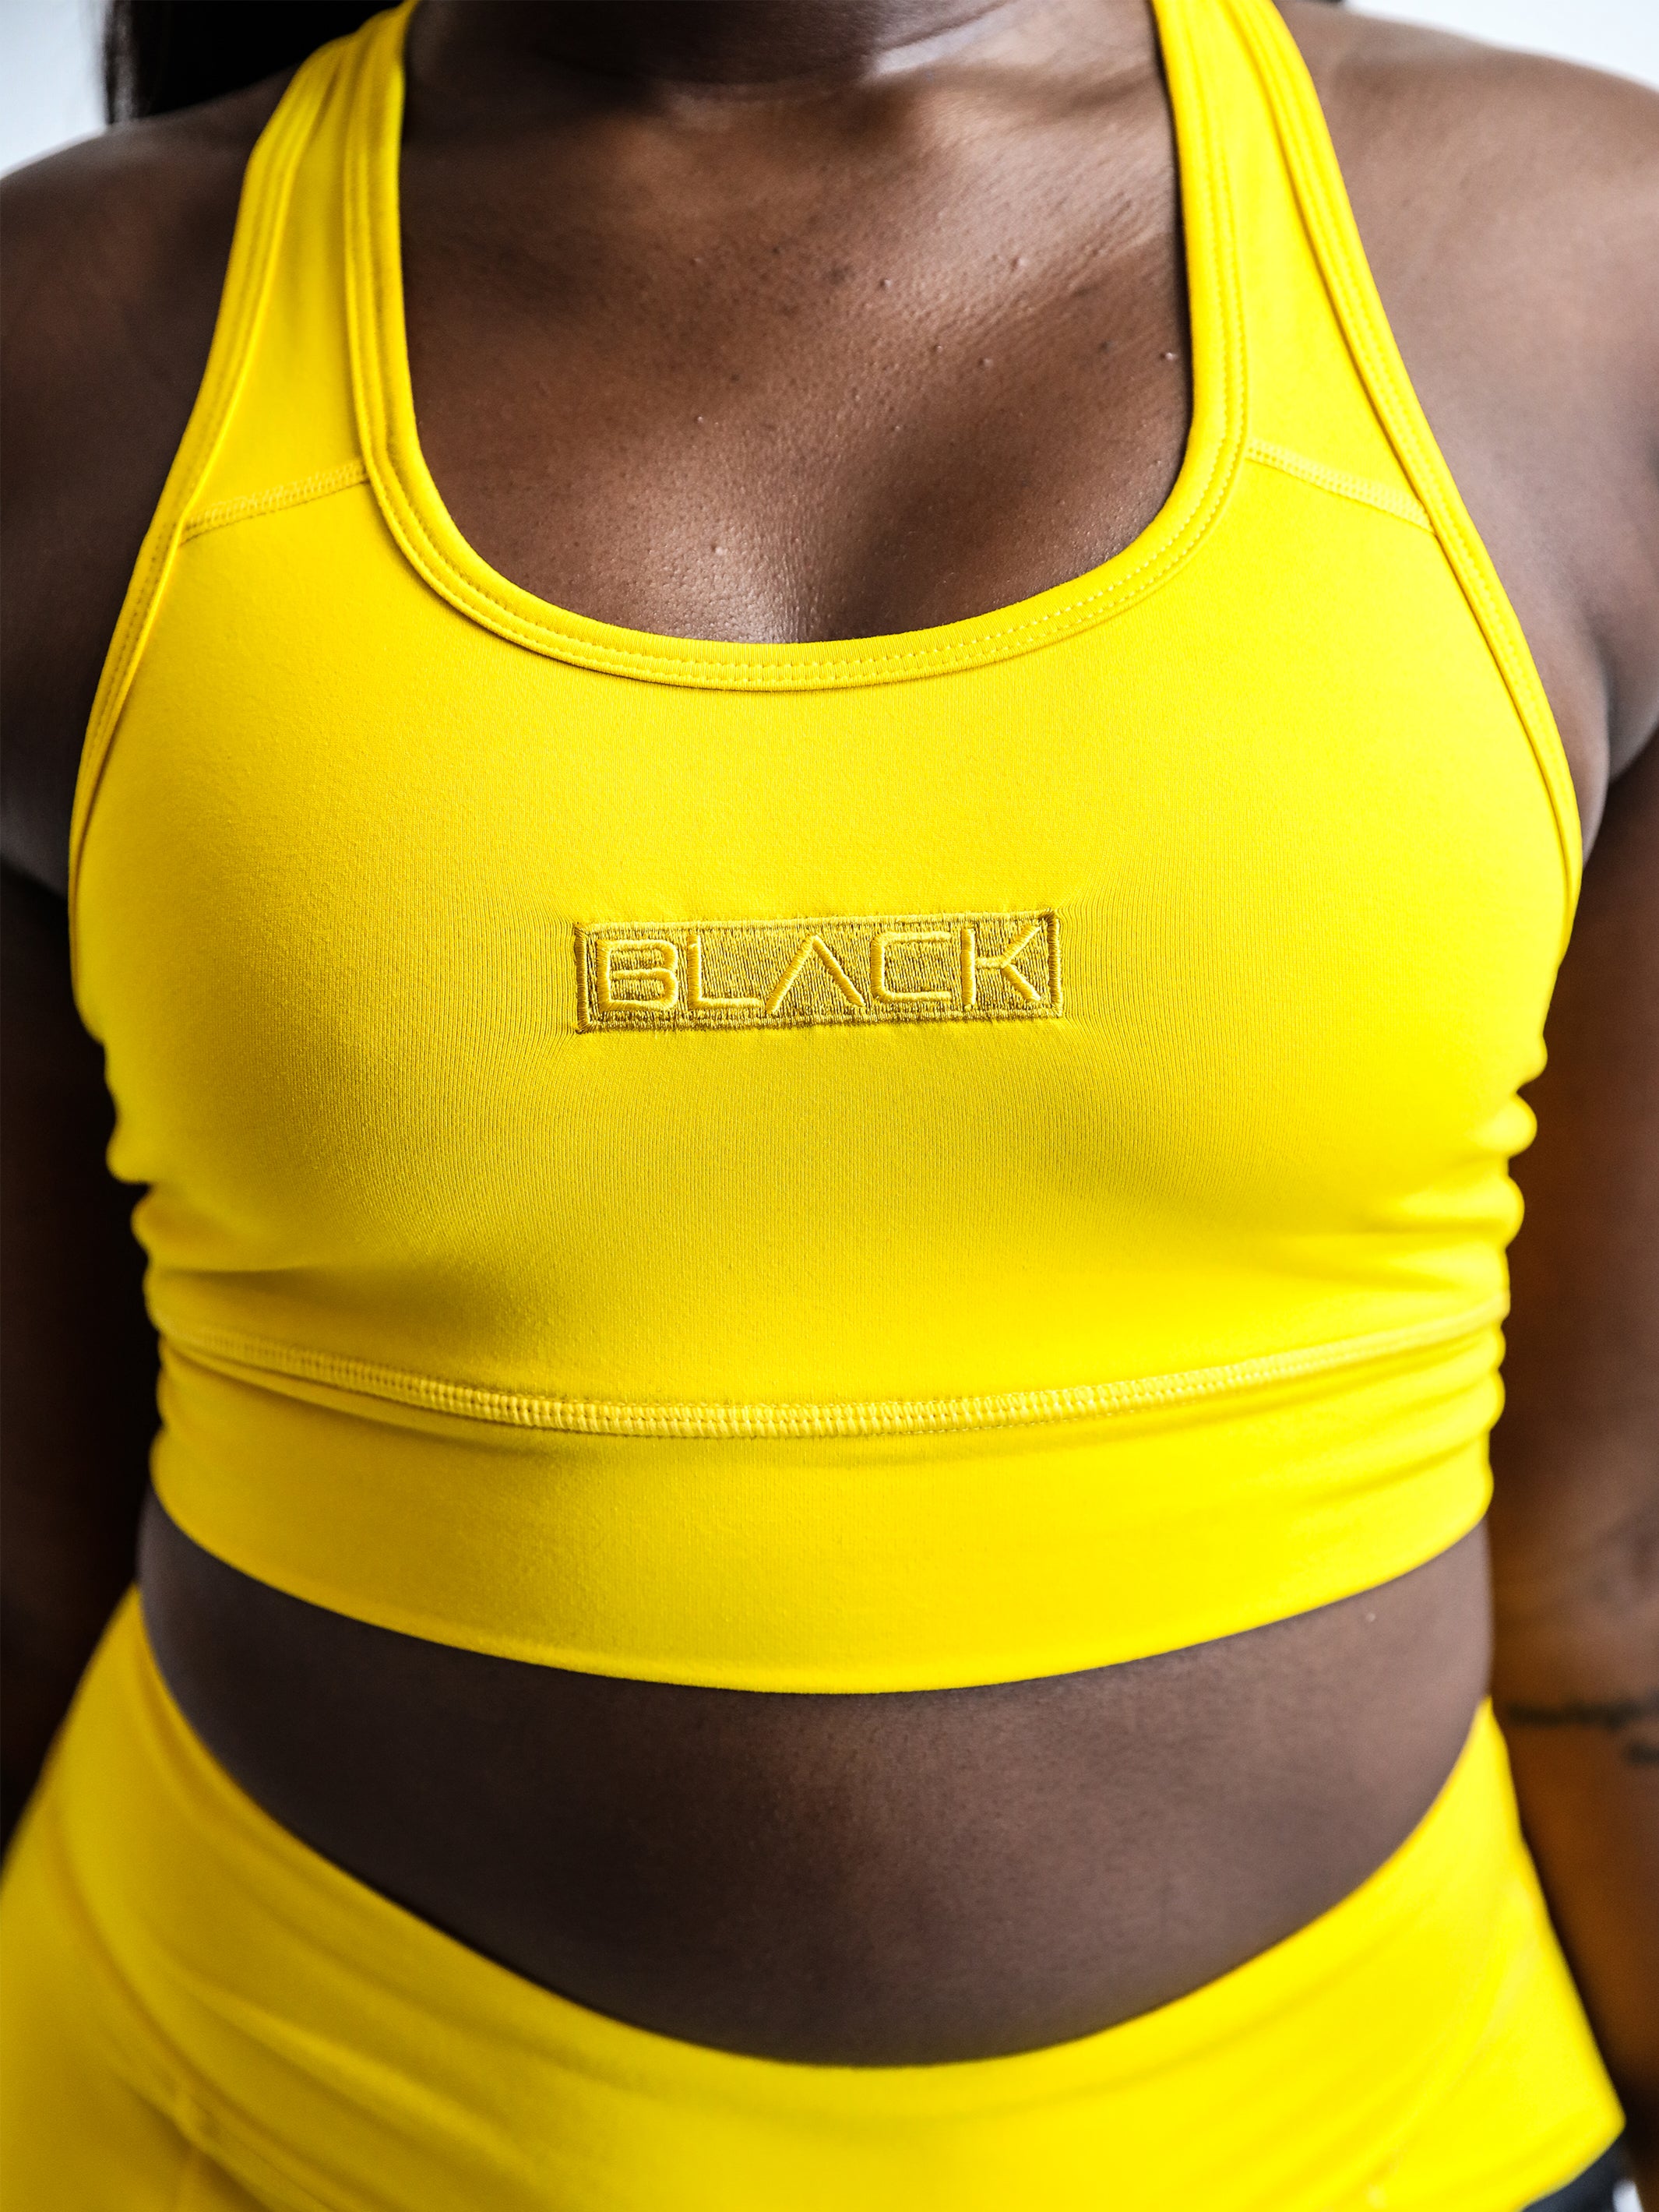 Women's Color Collection Athleisure Bra